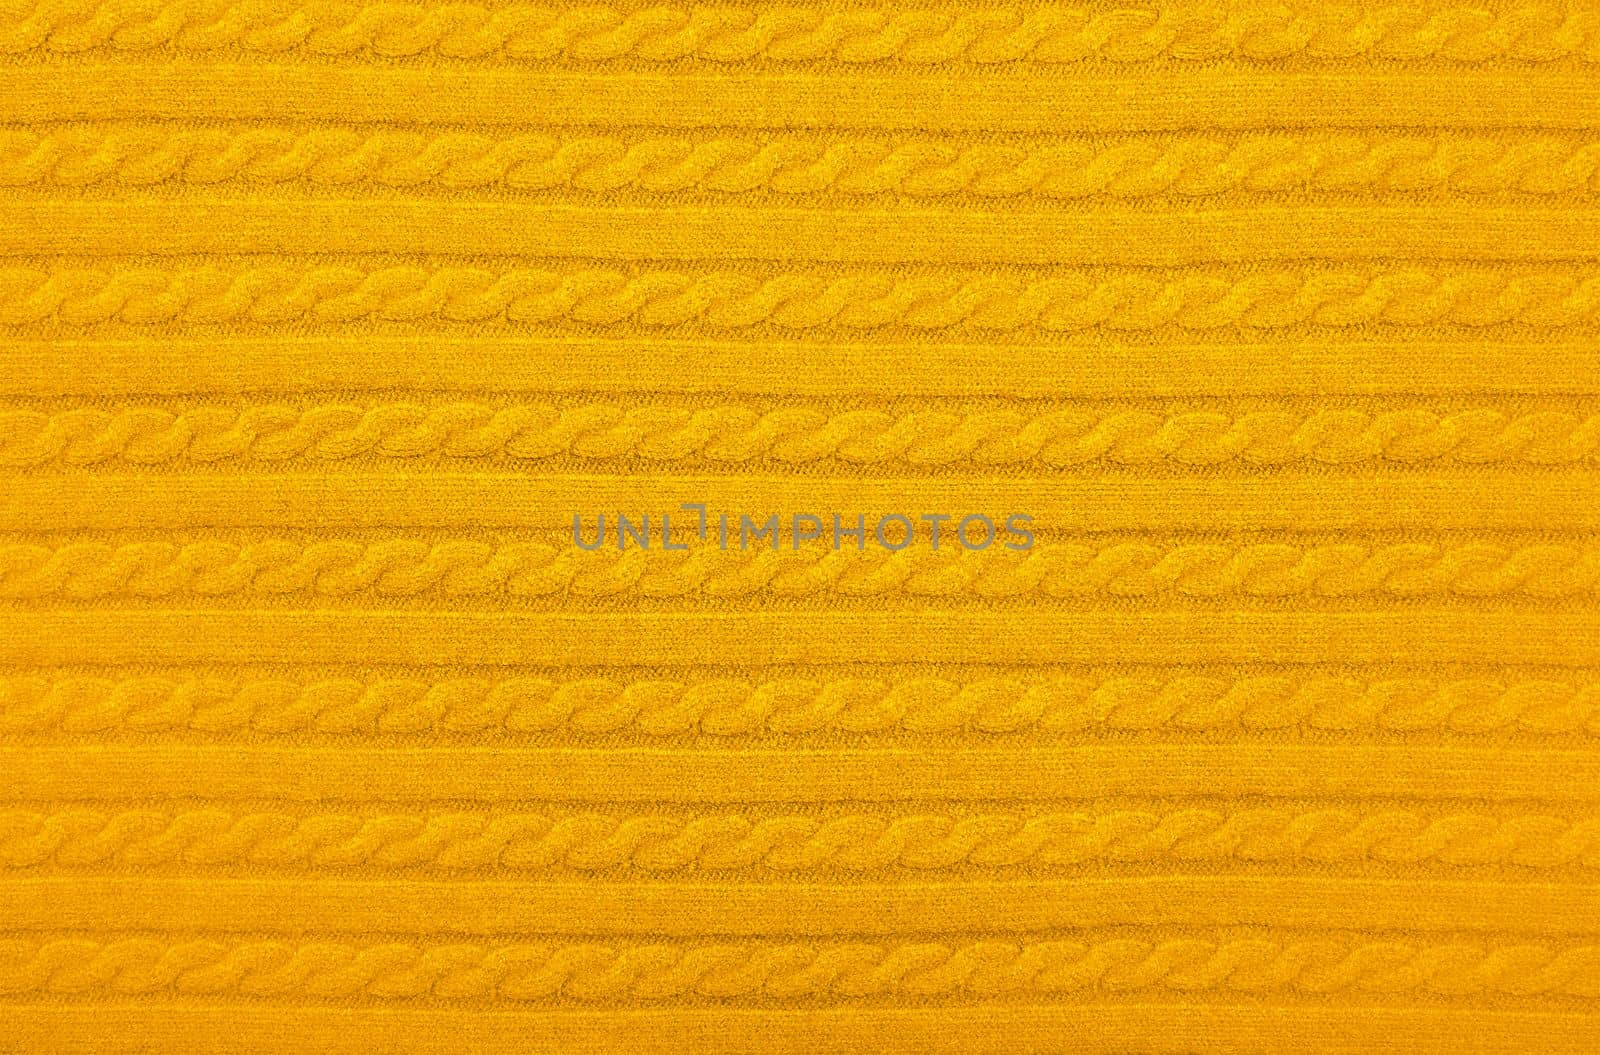 Close up background texture of warm yellow cable knitted wool jersey fabric sweater with row braid pattern